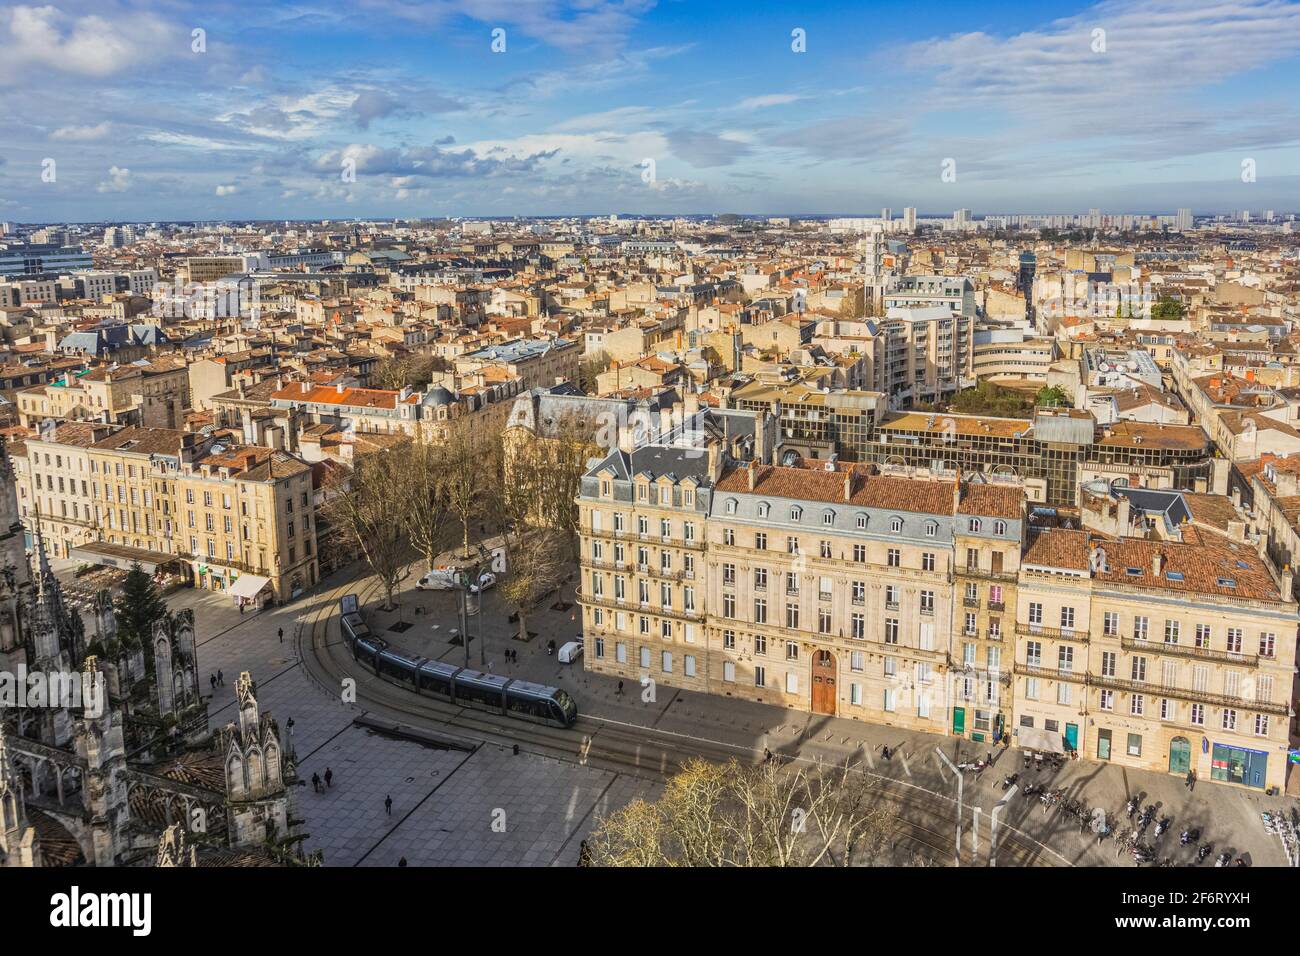 Bordeaux, Gironde Department, Aquitaine, France. Overall view of the city. The historic centre of Bordeaux is a UNESCO World Heritage Site. Stock Photo